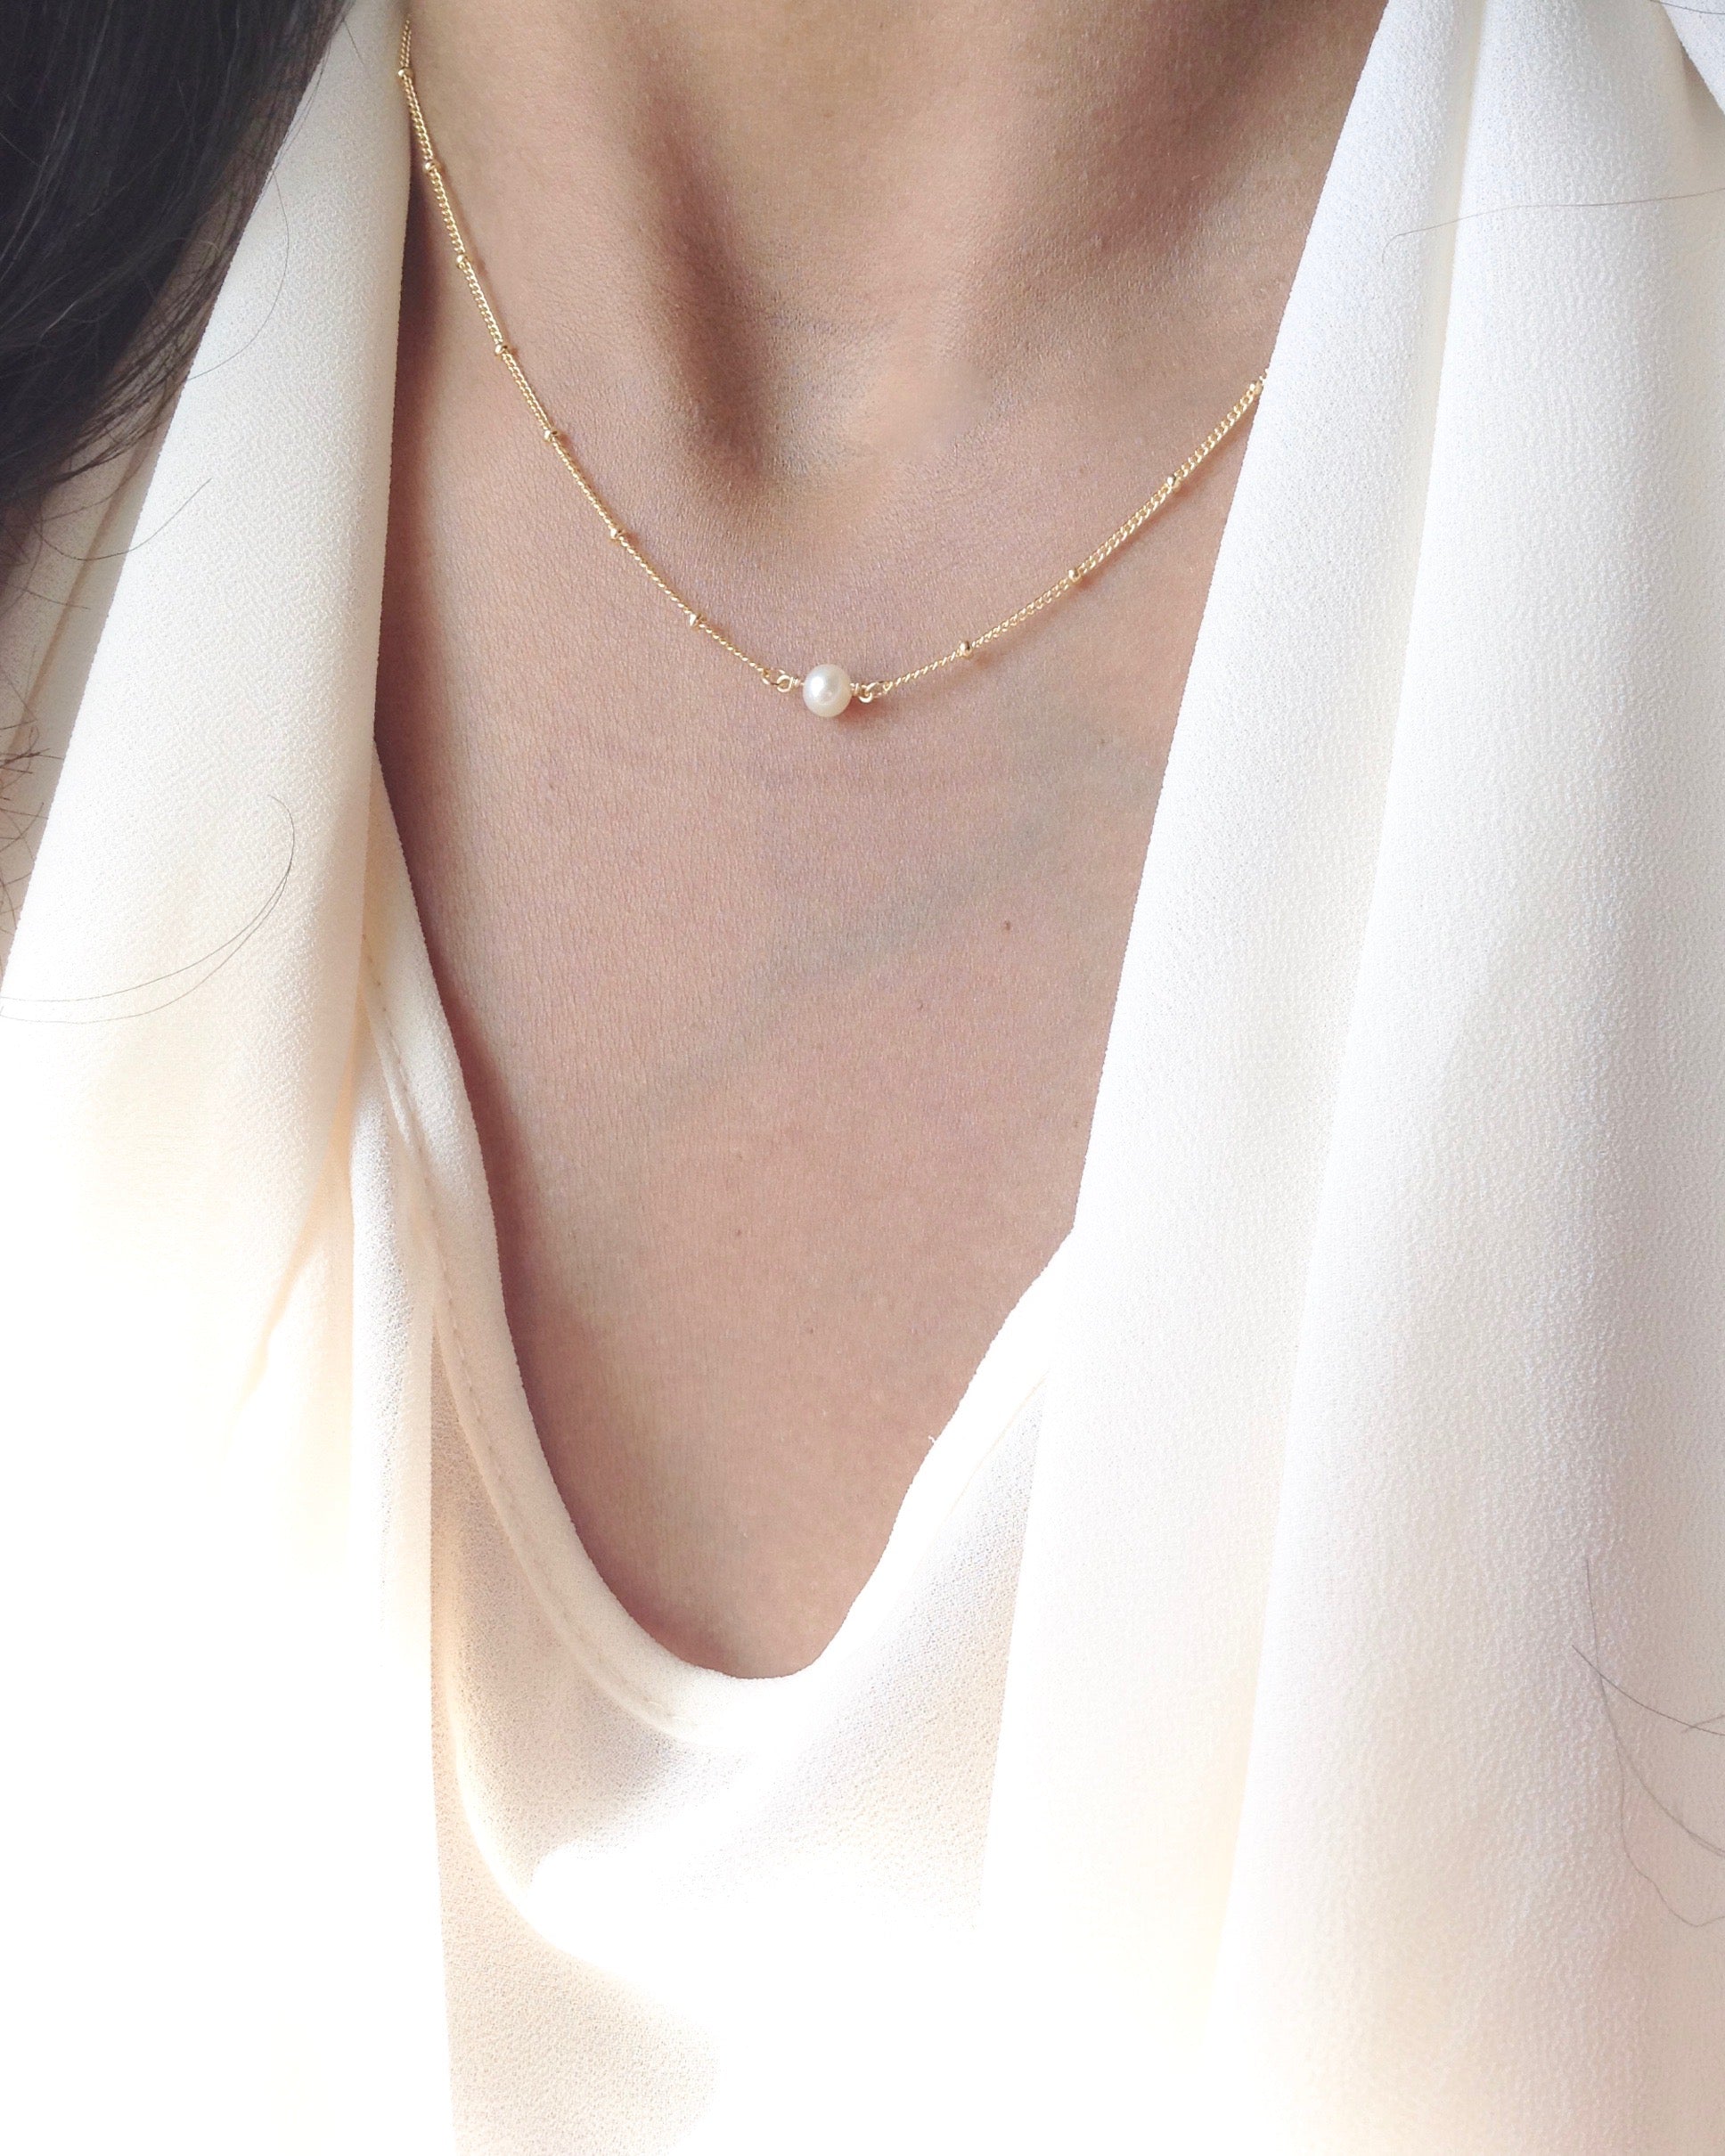 Simple Delicate Pearl Necklace | Dainty Everyday Necklace | IB Jewelry